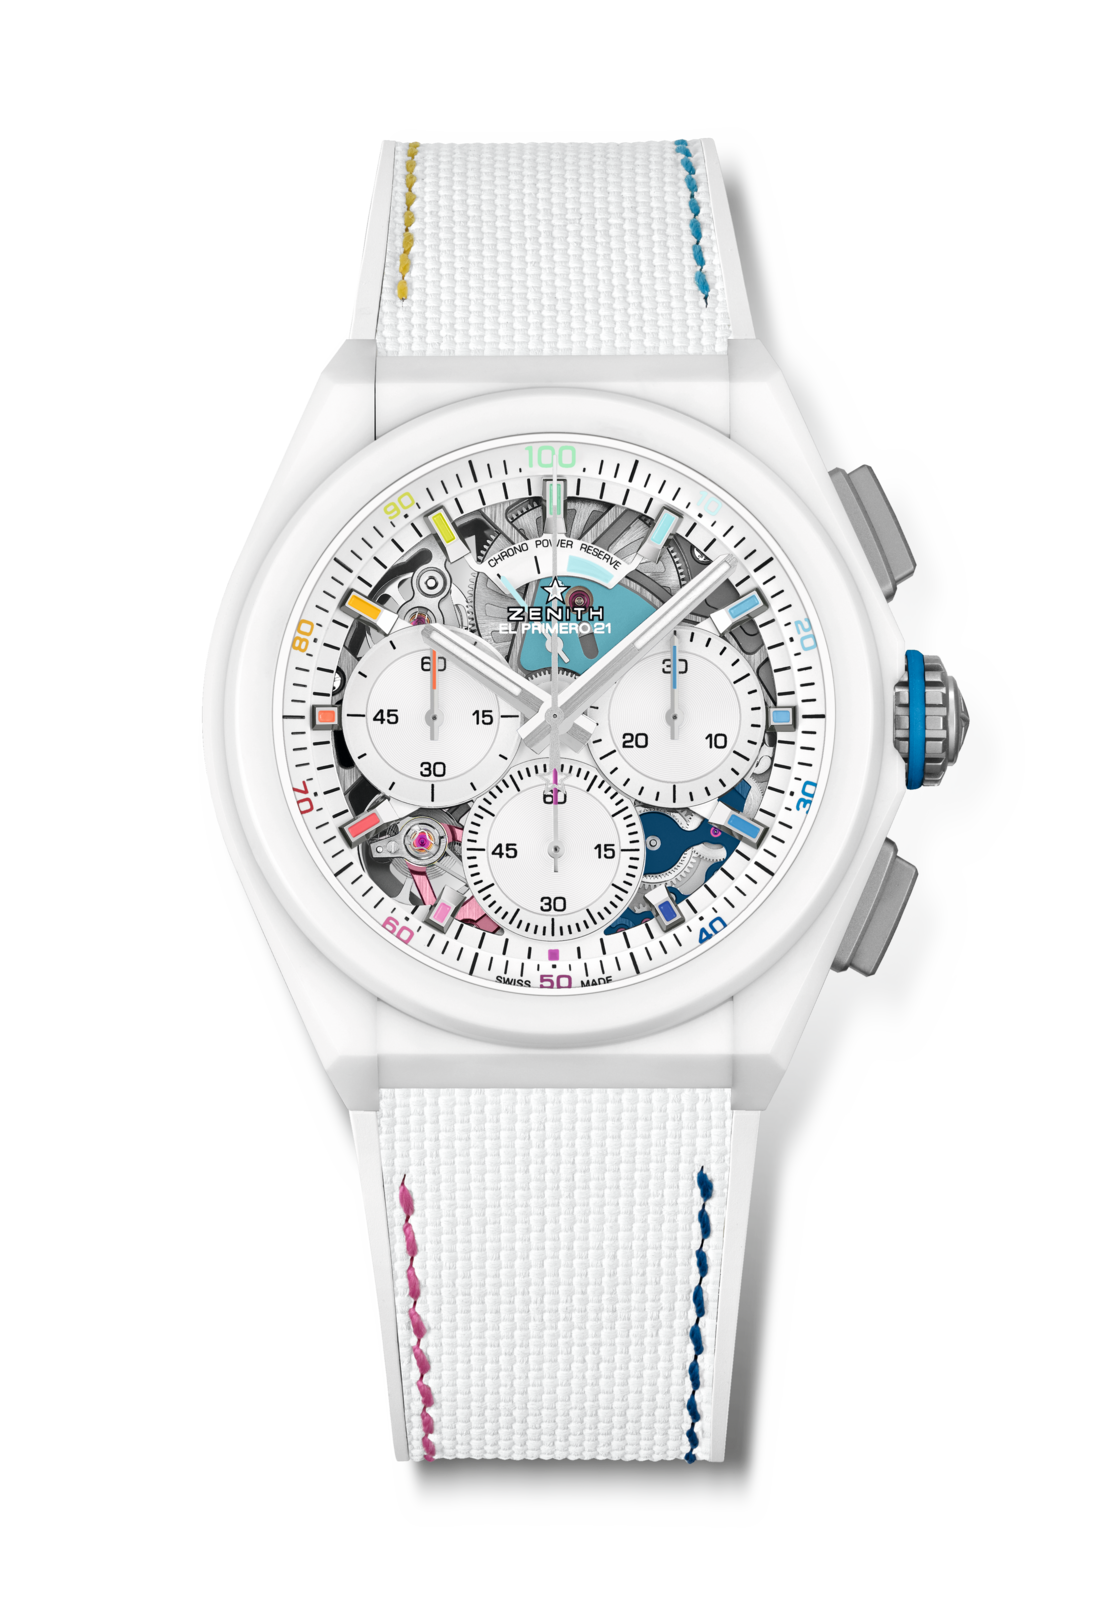 Colour Your Time with the DEFY 21 Chroma Limited Edition Watch 